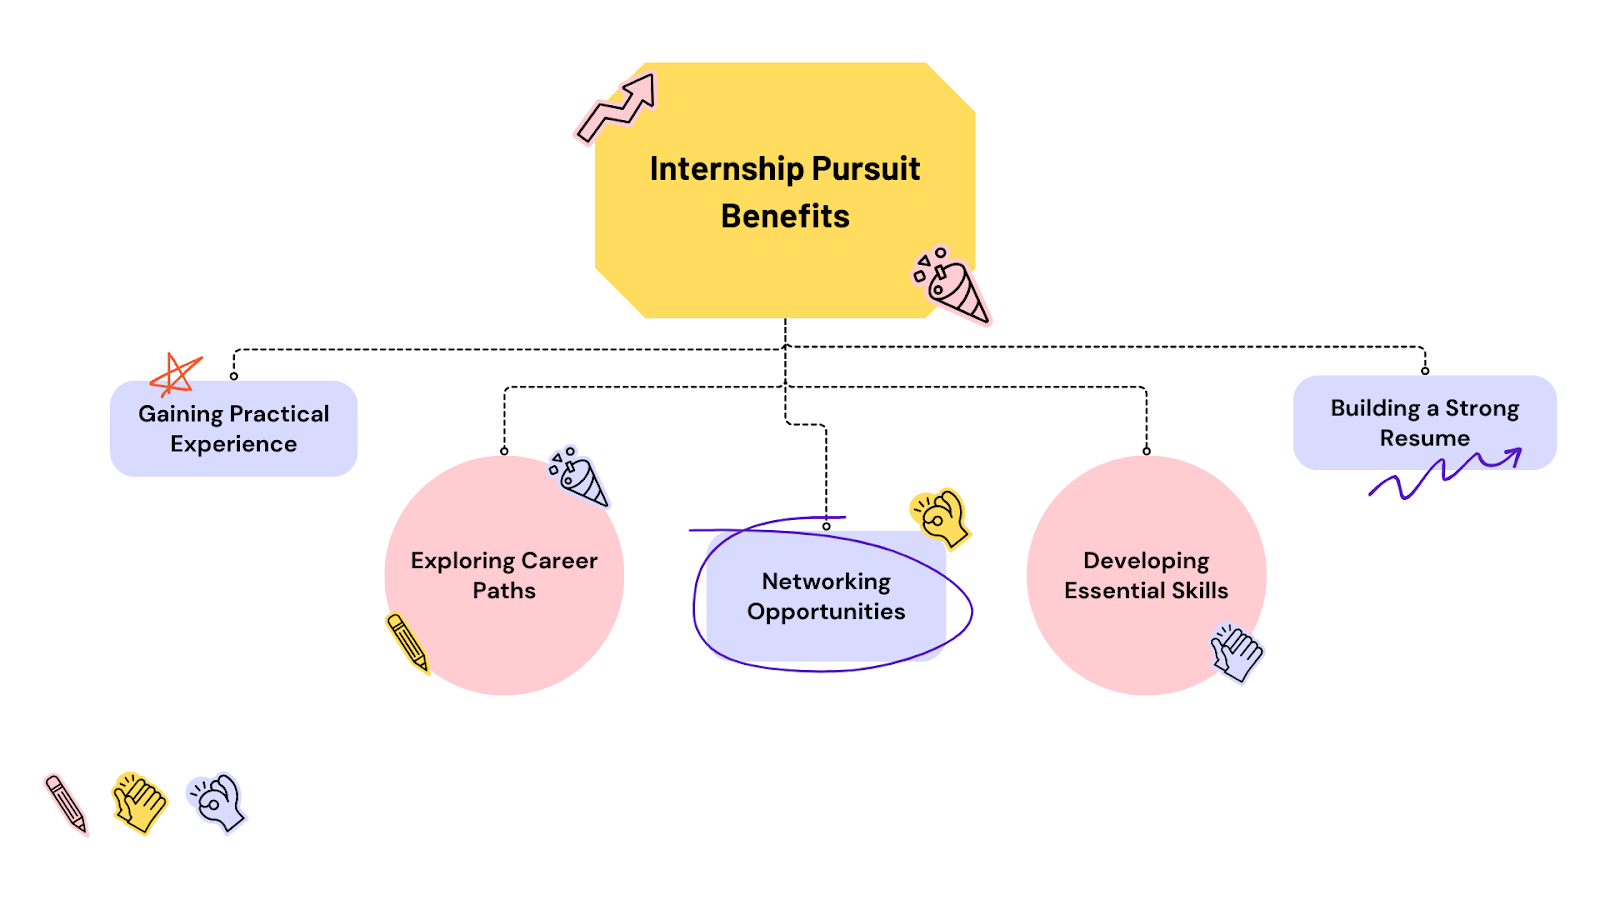 Why Should Students Pursue Internships? Gaining Practical Experience Exploring Career Paths Internship Pursuit Benefits Networking Opportunities Developing Essential Skills Building a Strong Resume 